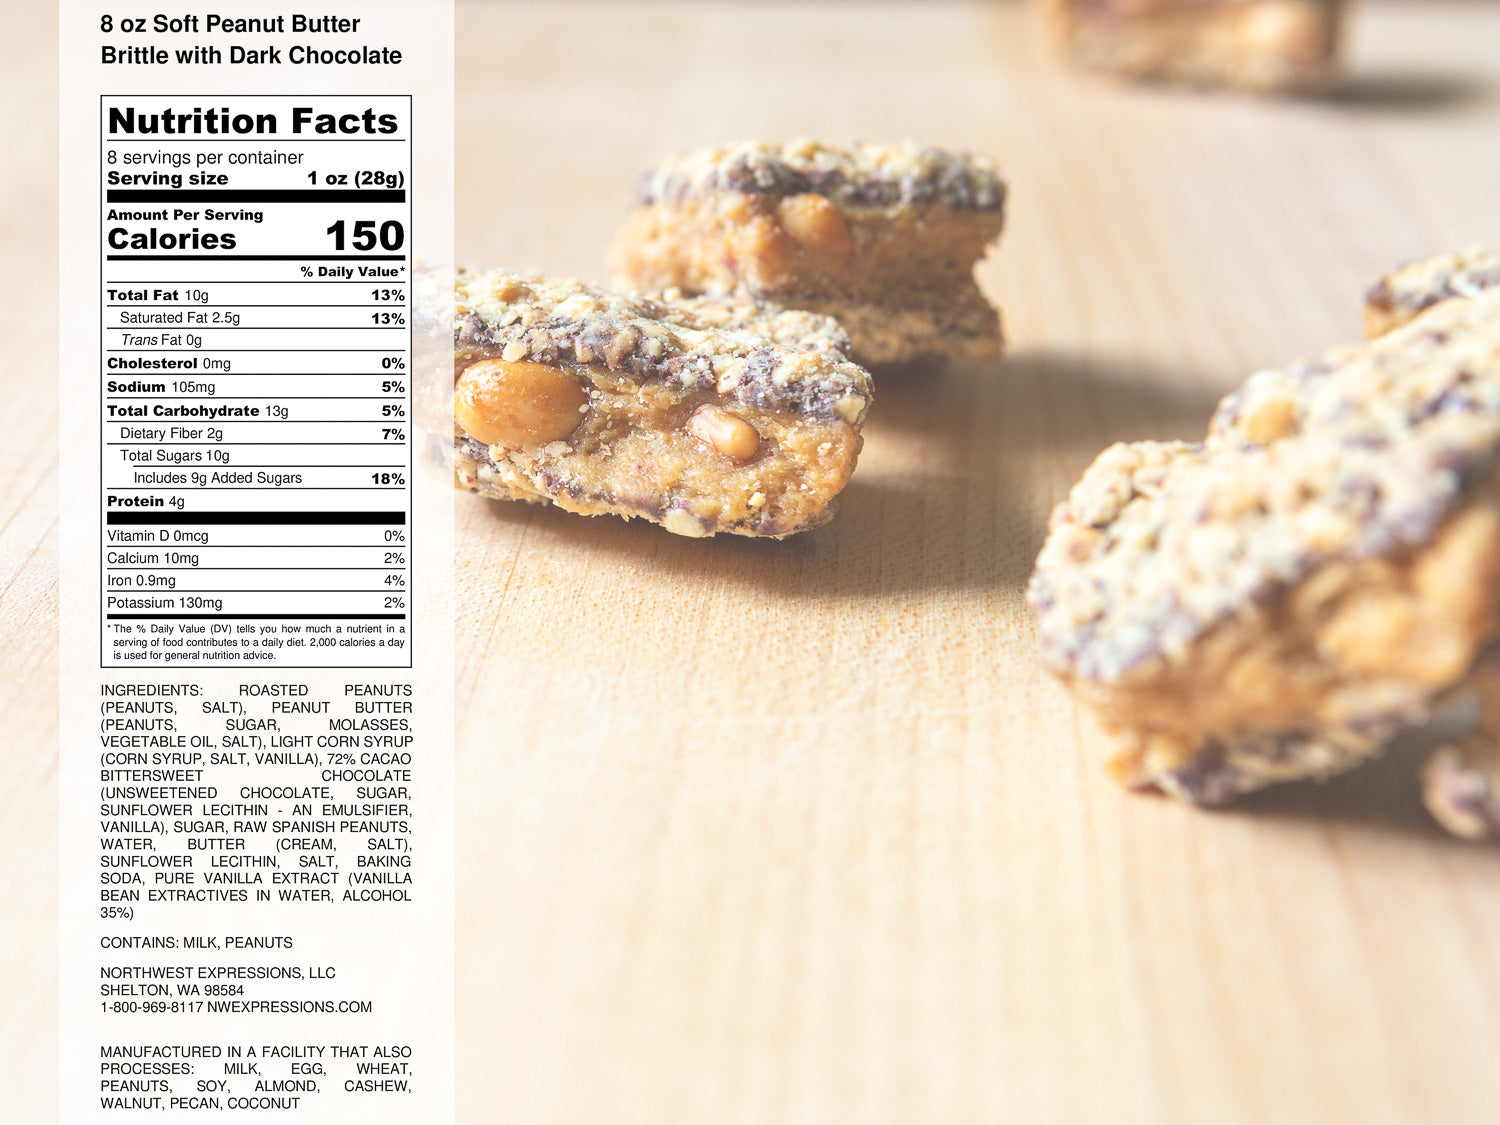 nutrition facts for soft peanut butter brittle dipped in dark chocolate